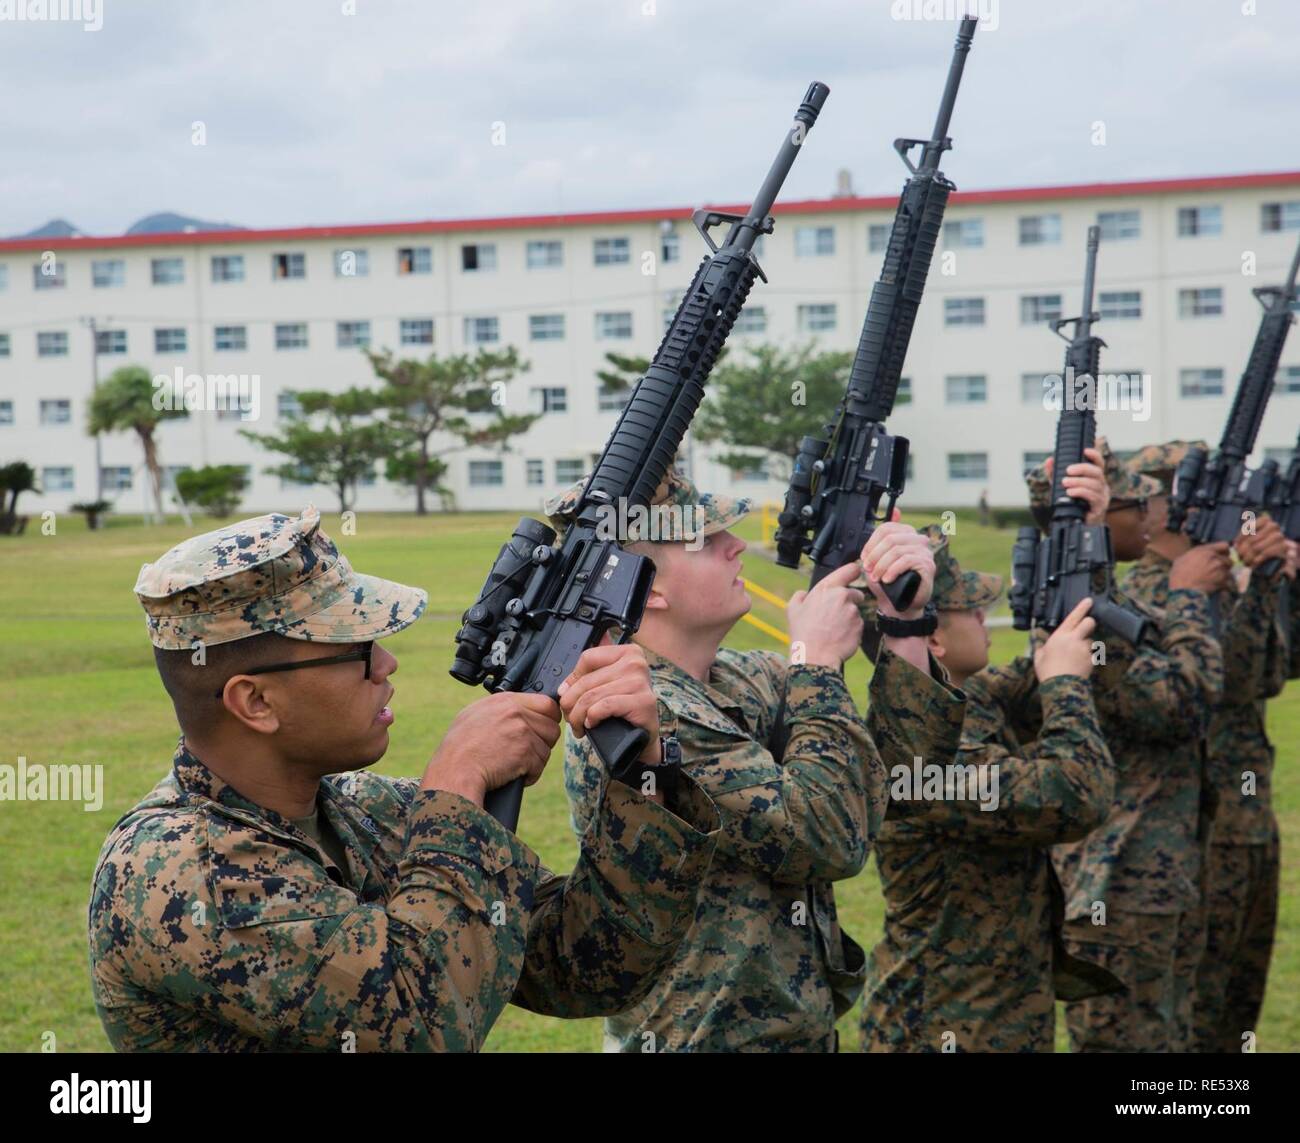 Marines with the 31st Marine Expeditionary Unit perform “inspection arms” during practice for the Commanding General’s Readiness Inspection at Camp Hansen, Okinawa, Japan, Jan. 3, 2019. The CGRI is a regular requirement for units to ensure mission readiness. The 31st MEU, the Marine Corps’ only continuously forward-deployed MEU, provides a flexible force ready to perform a wide range of military operations as the premier crisis response force in the Indo-Pacific region. Stock Photo